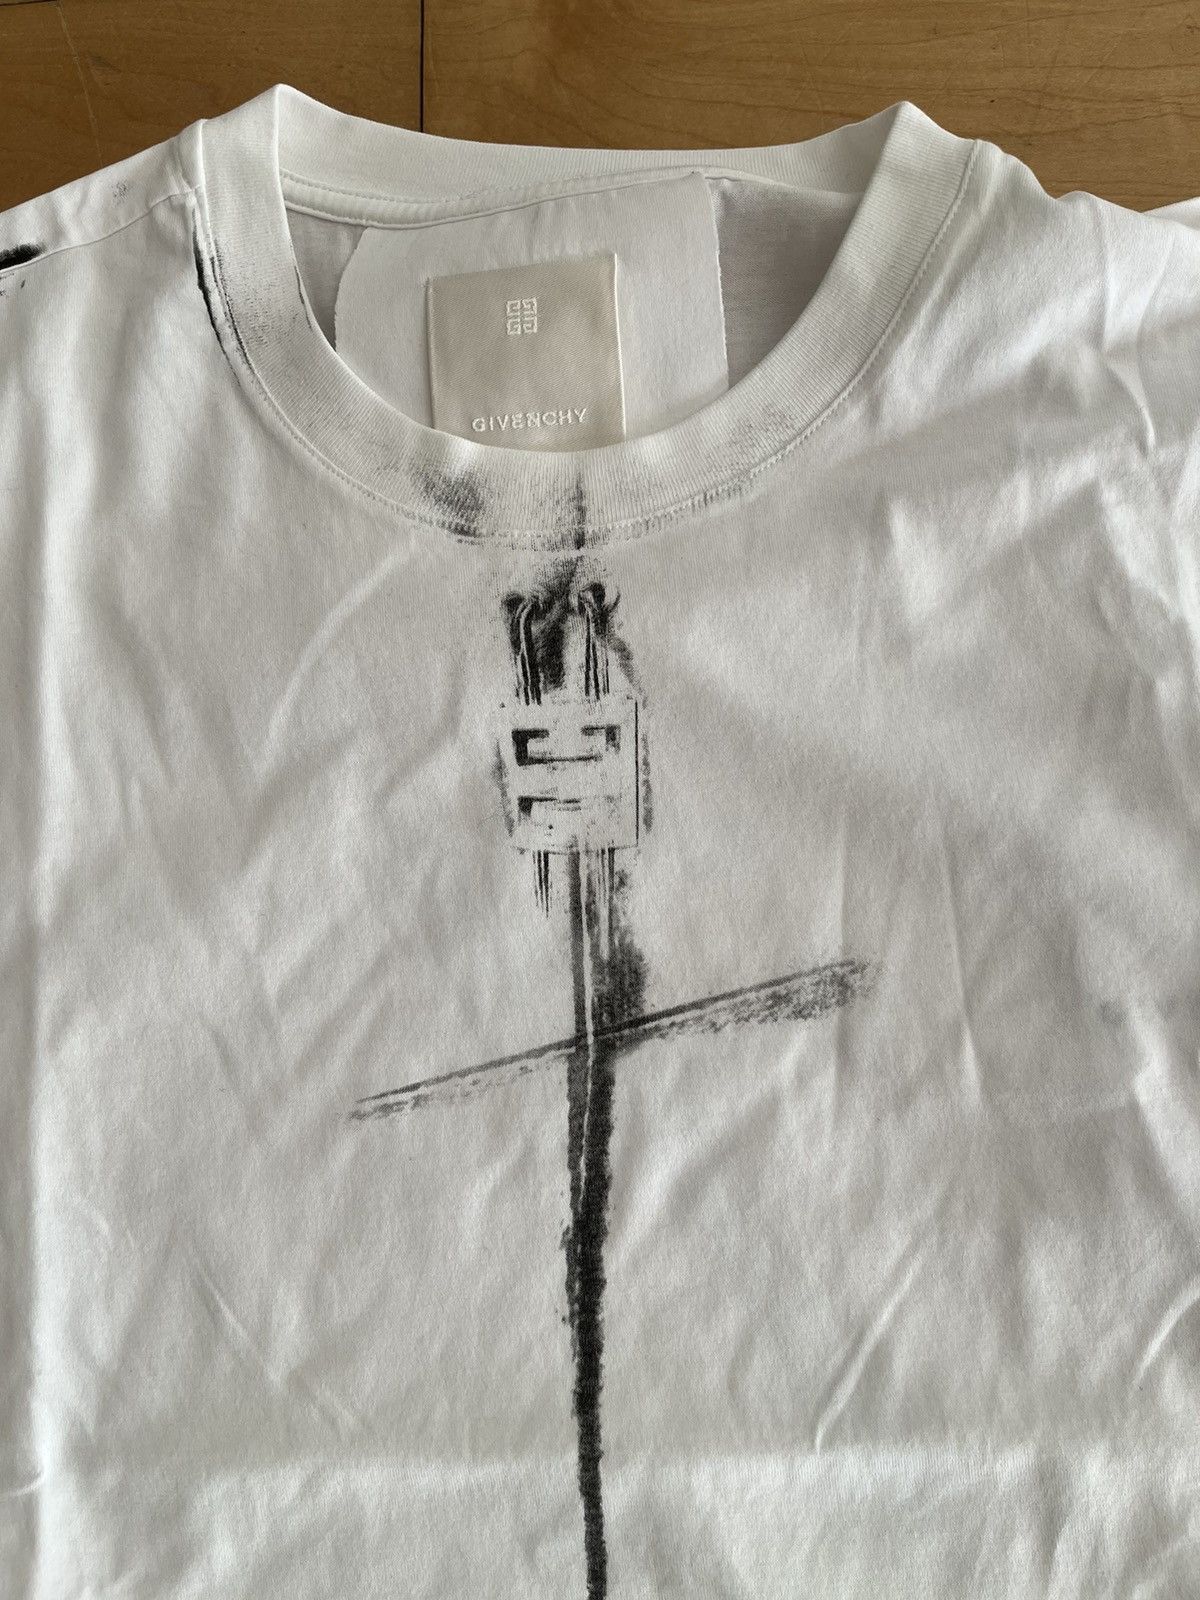 NWT - Givenchy Oversized Trompe L'Oeil T-shirt - 3